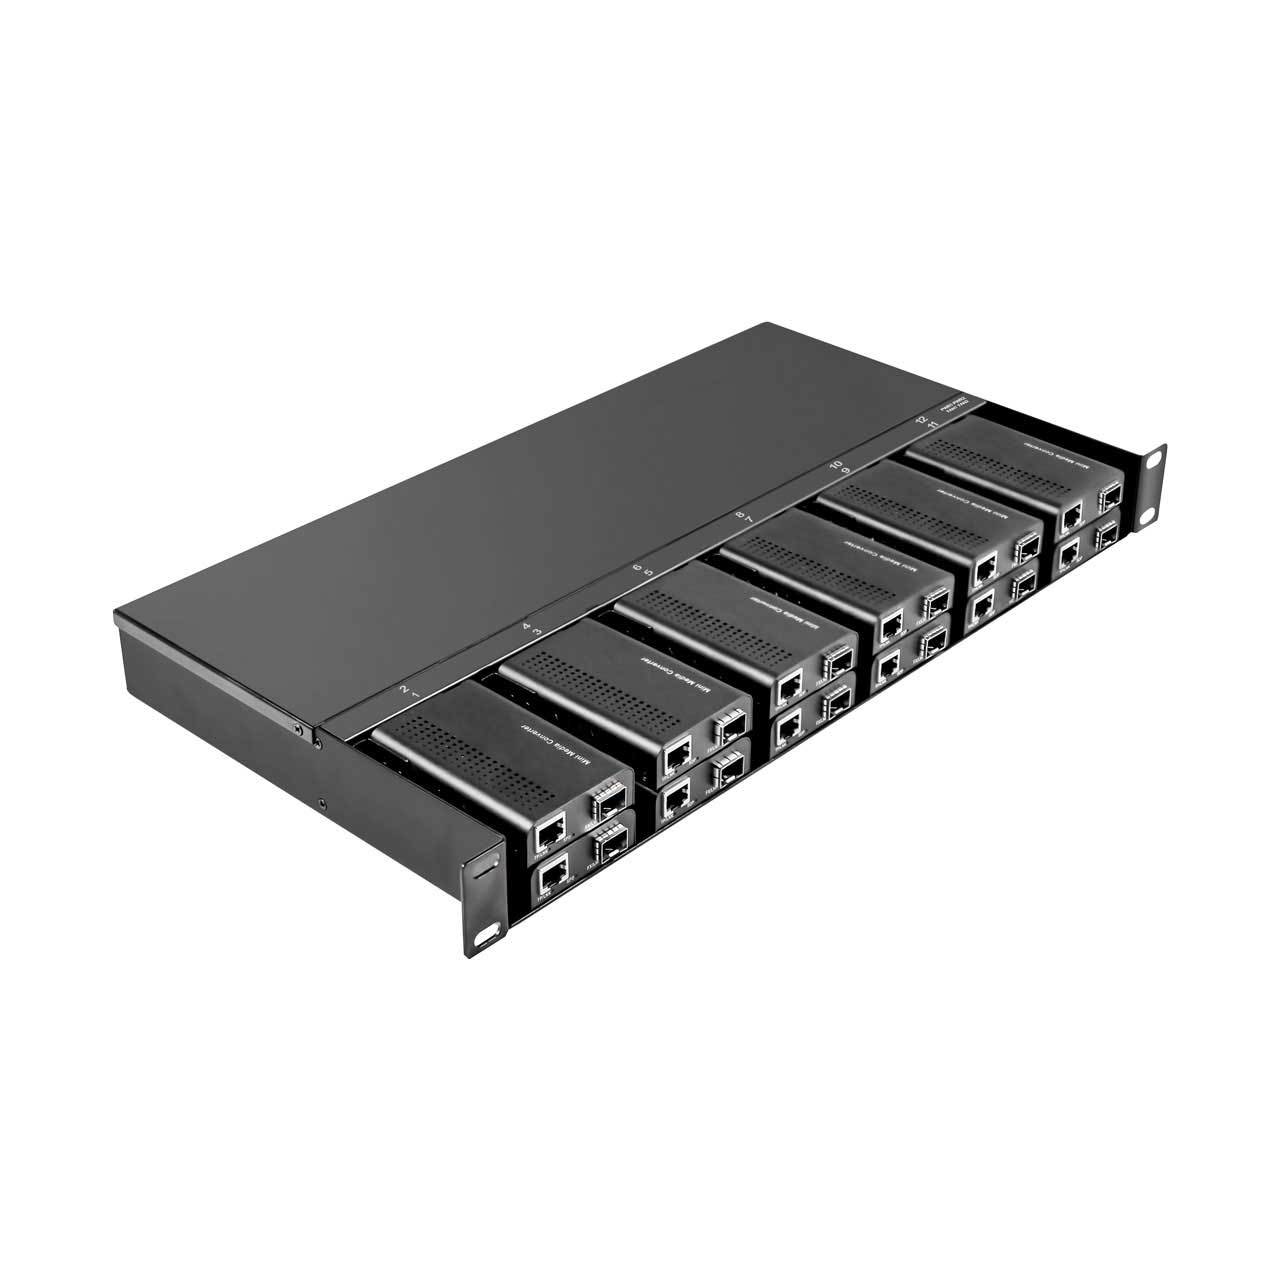 Cleerline SSF-1RUME-12AC 12 Slot Fiber Chassis with One AC Power Supply and Fans for SSF Series Converters SSF-1RUME-12AC